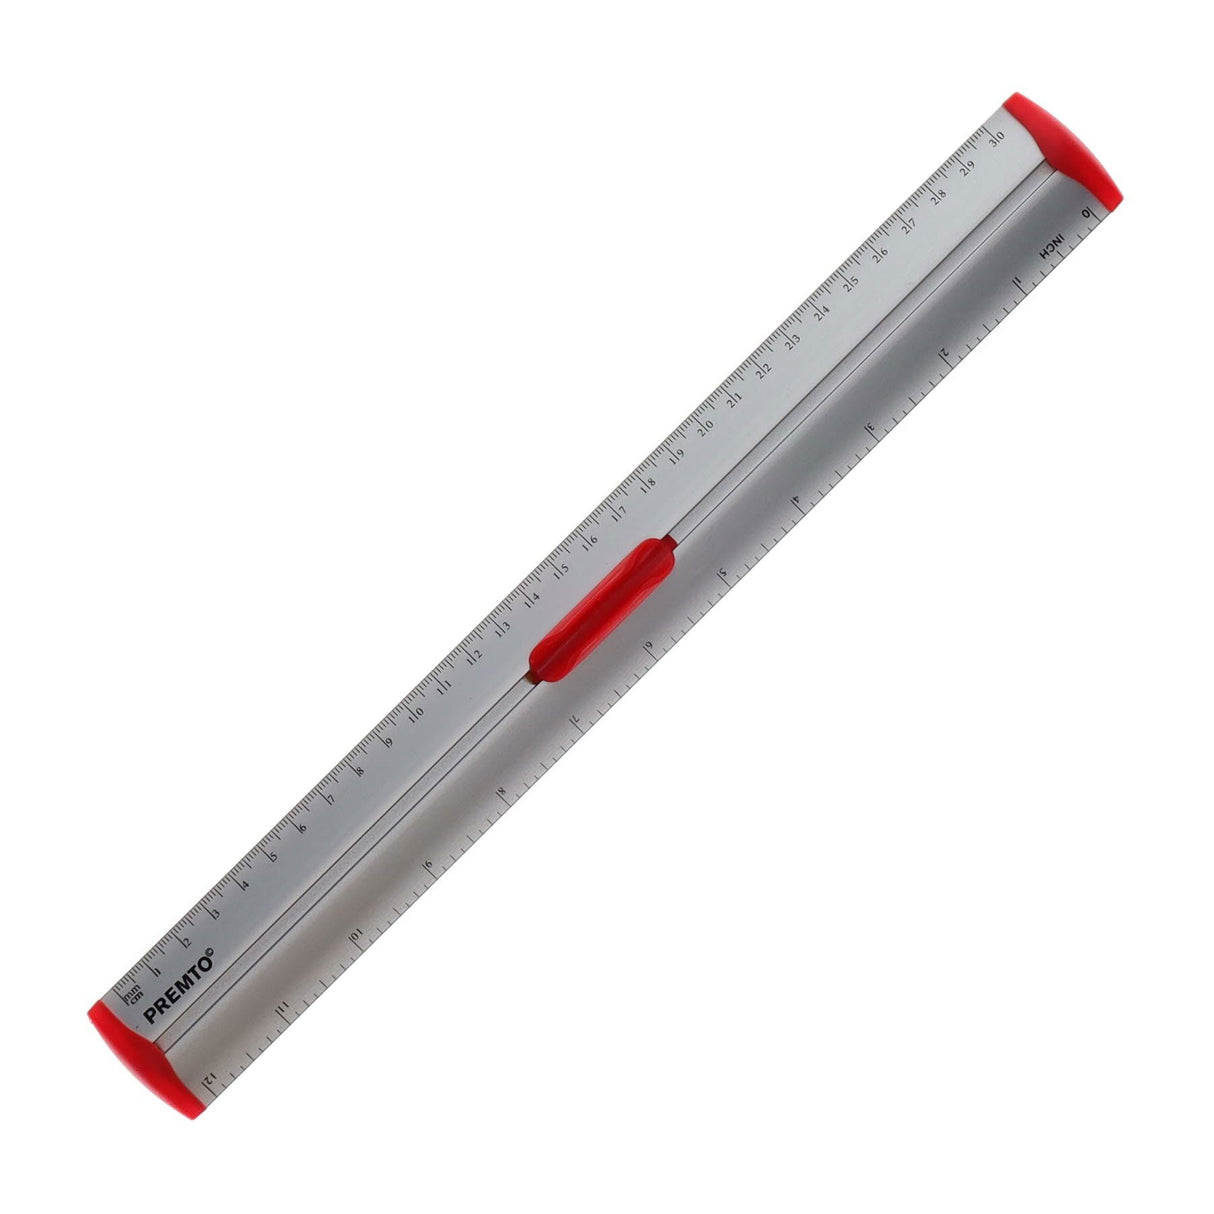 Premto S1 Aluminum Ruler With Grip 30cm - Ketchup Red | Stationery Shop UK